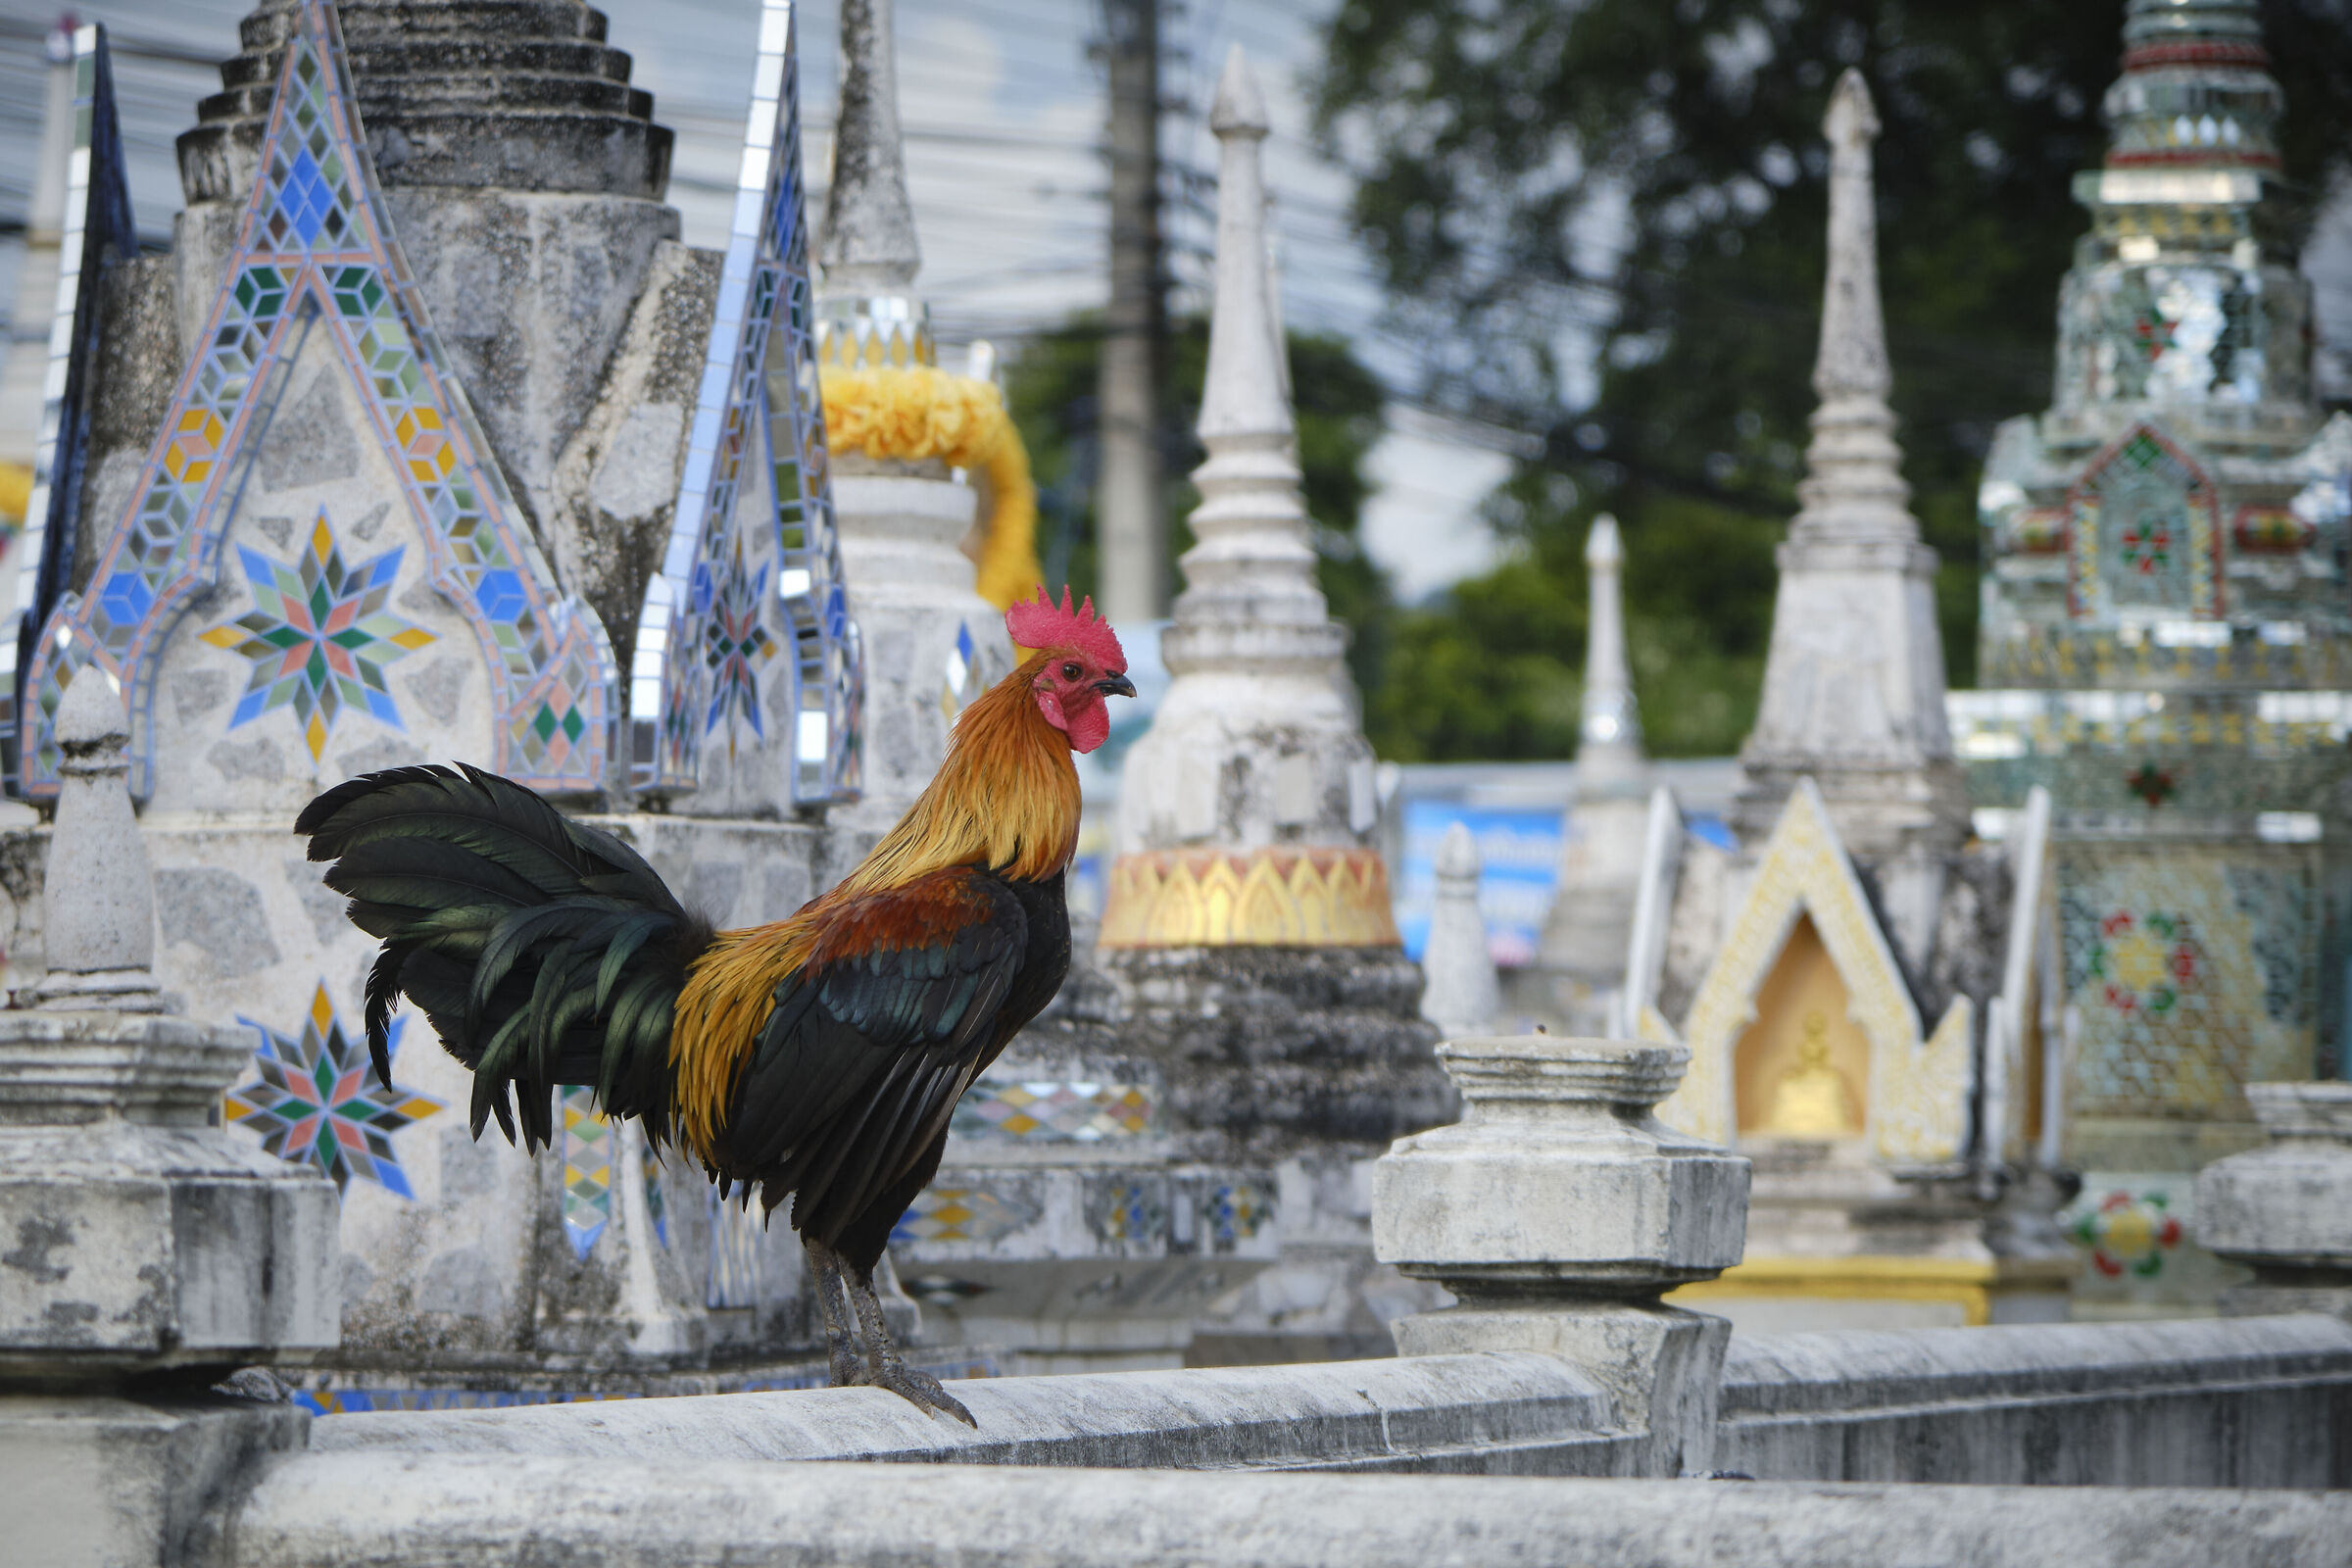 The rooster among the stupas...